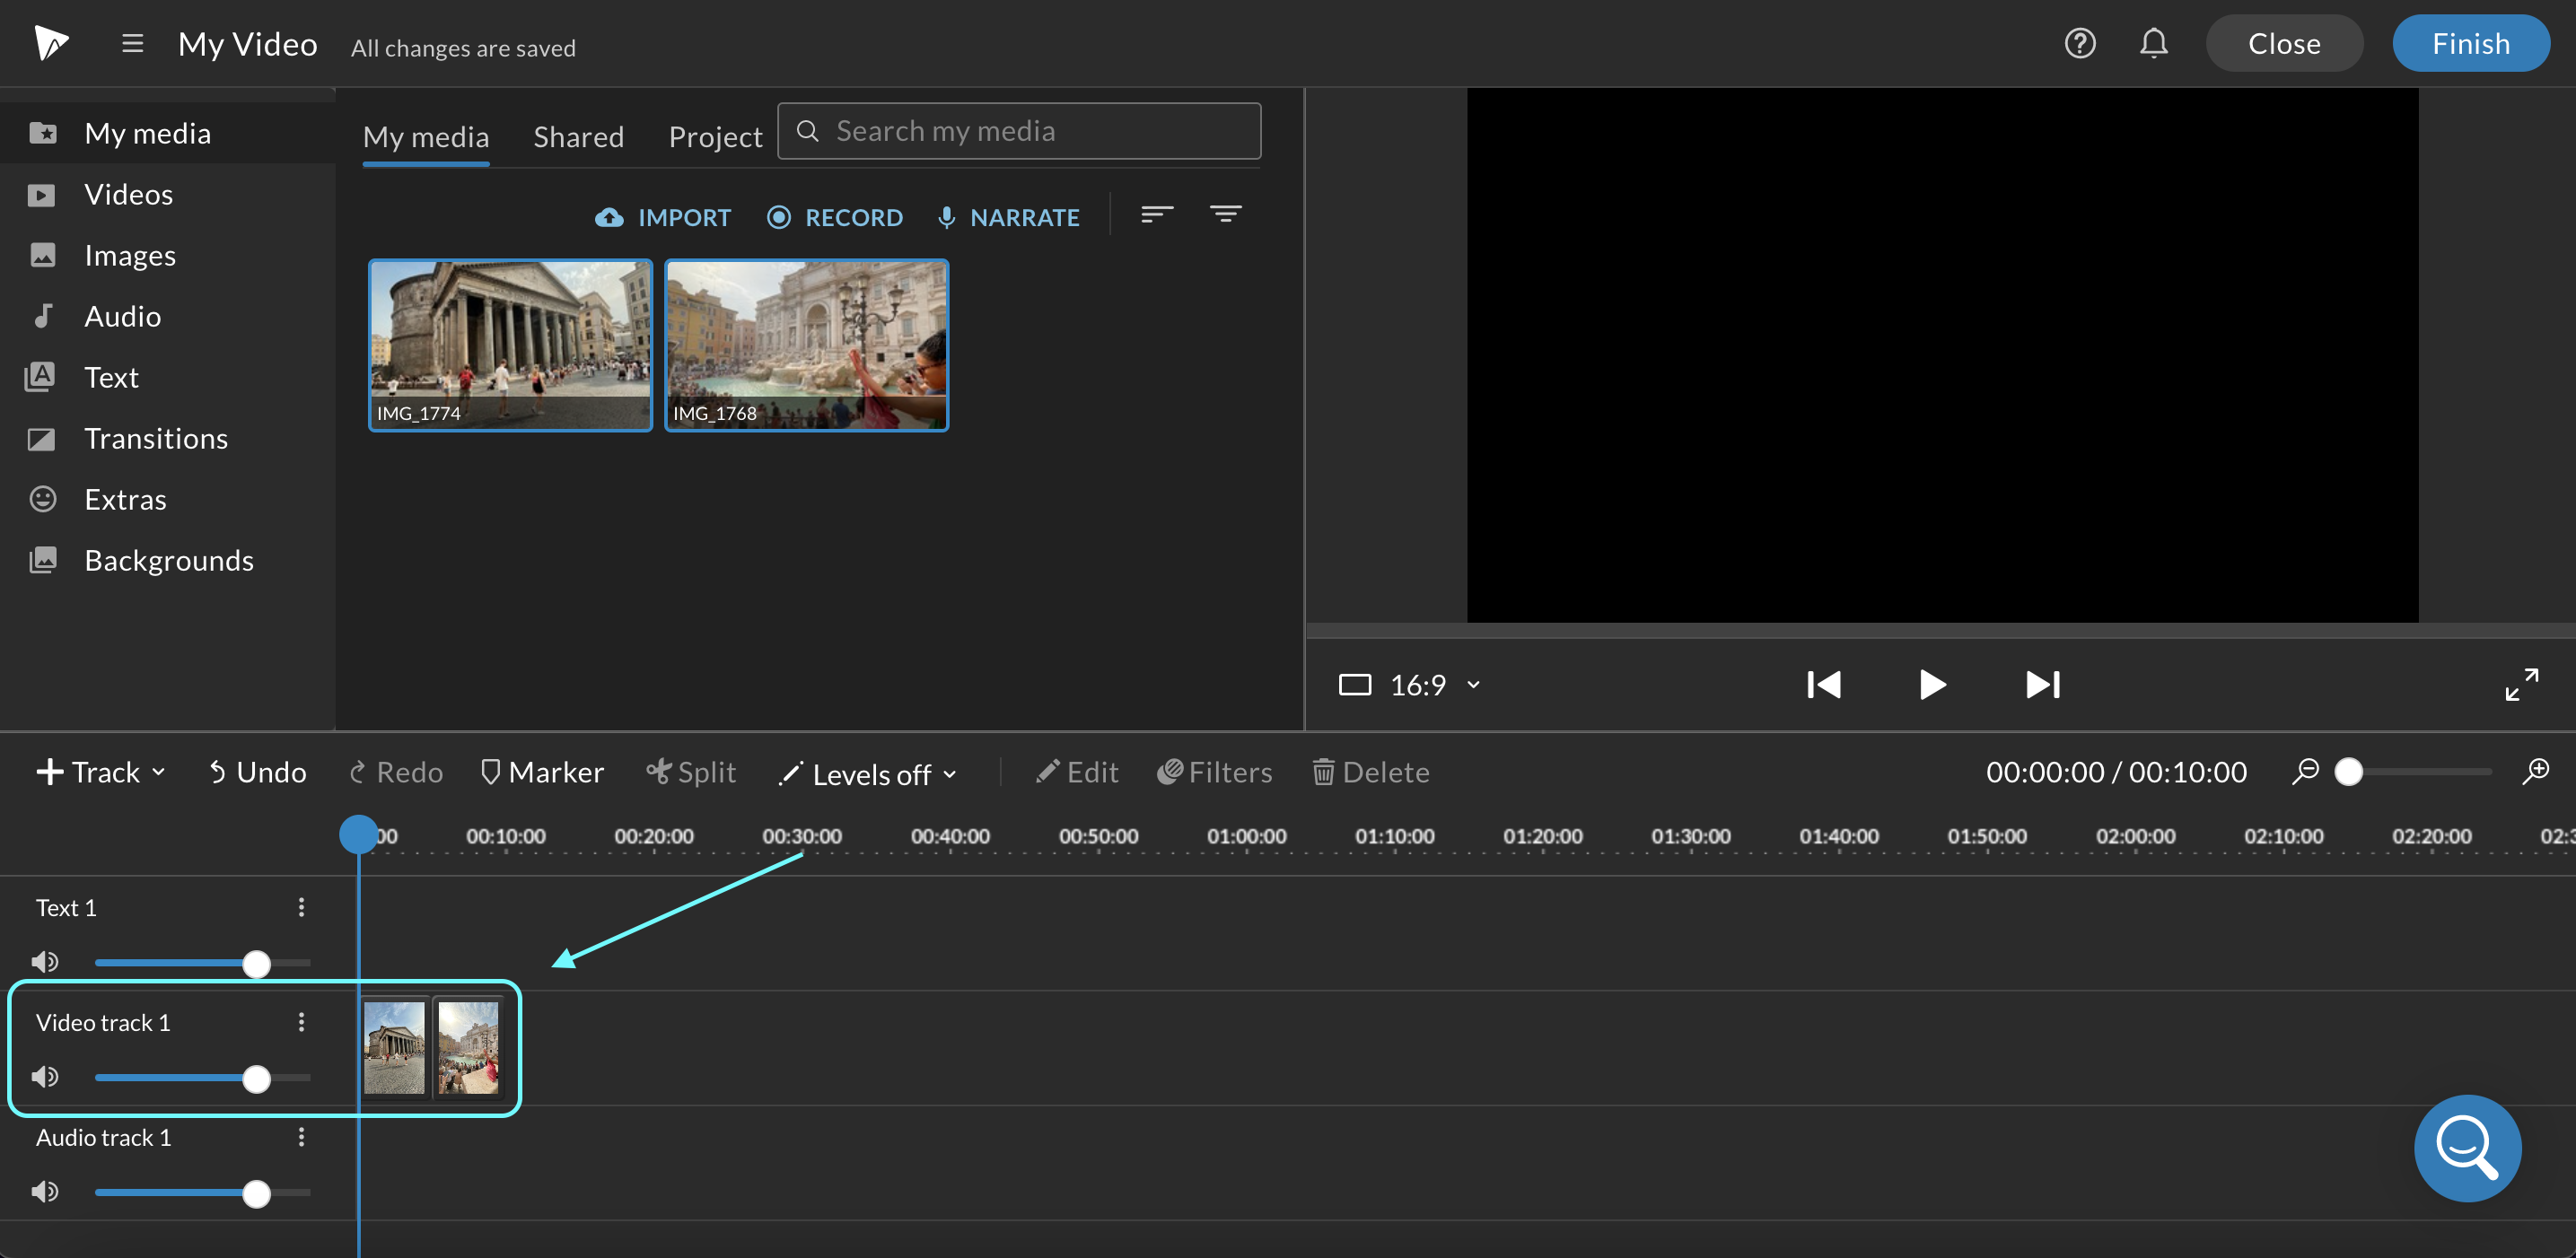 Blue arrow pointing towards "Video track 1" in the WeVideo timeline editor.